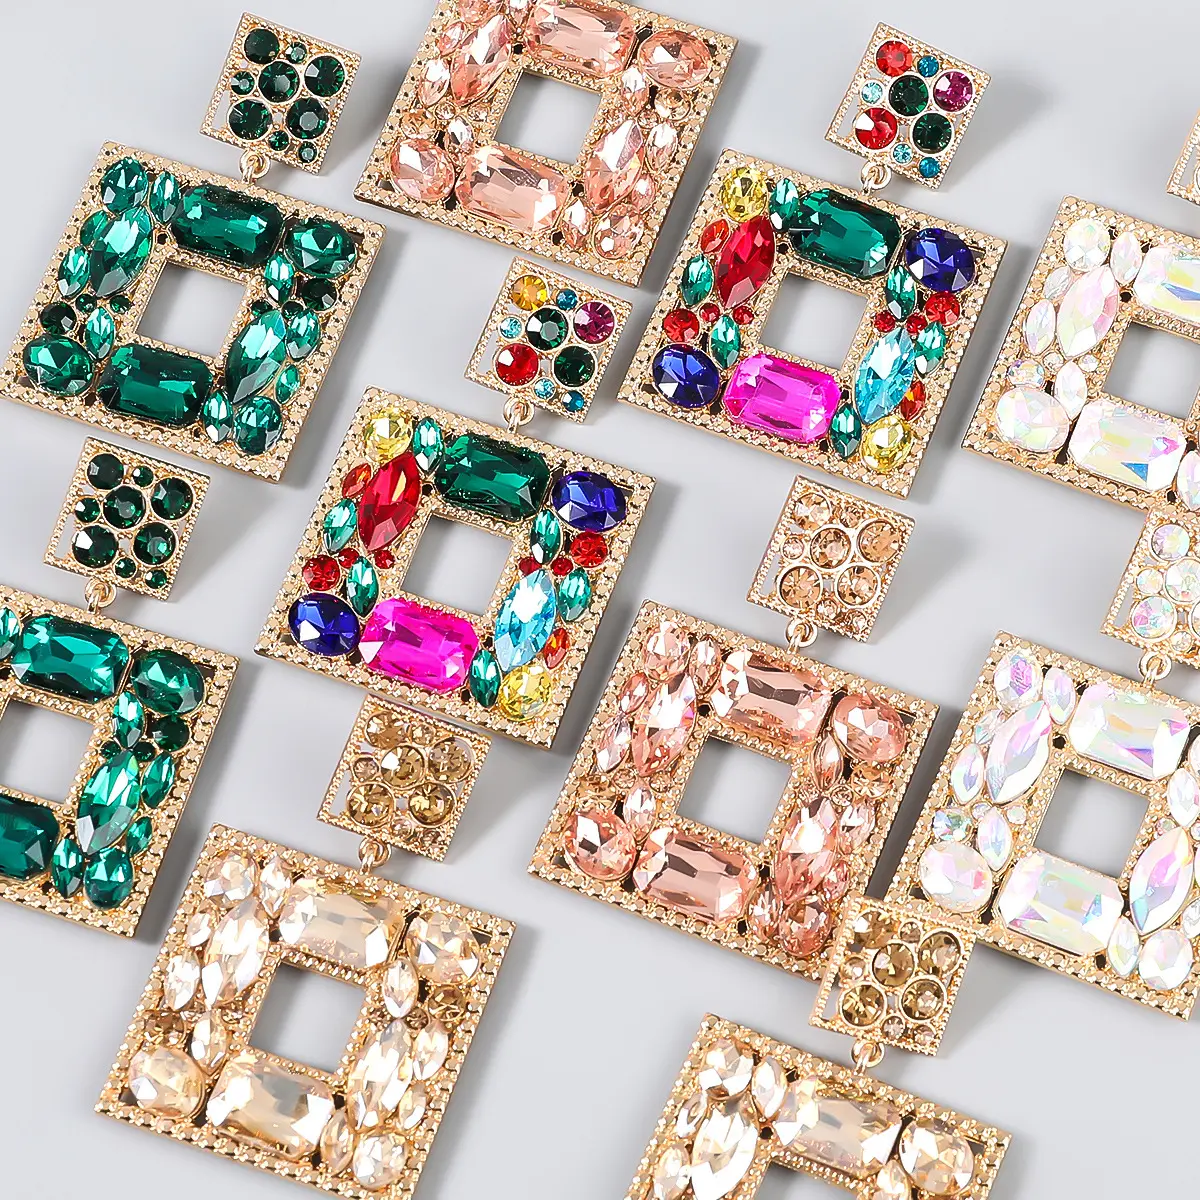 Luxury Geometric Fashion Jewelry Large Square Colorful Crystal Rhinestone Statement Drop Earrings For Women 2022